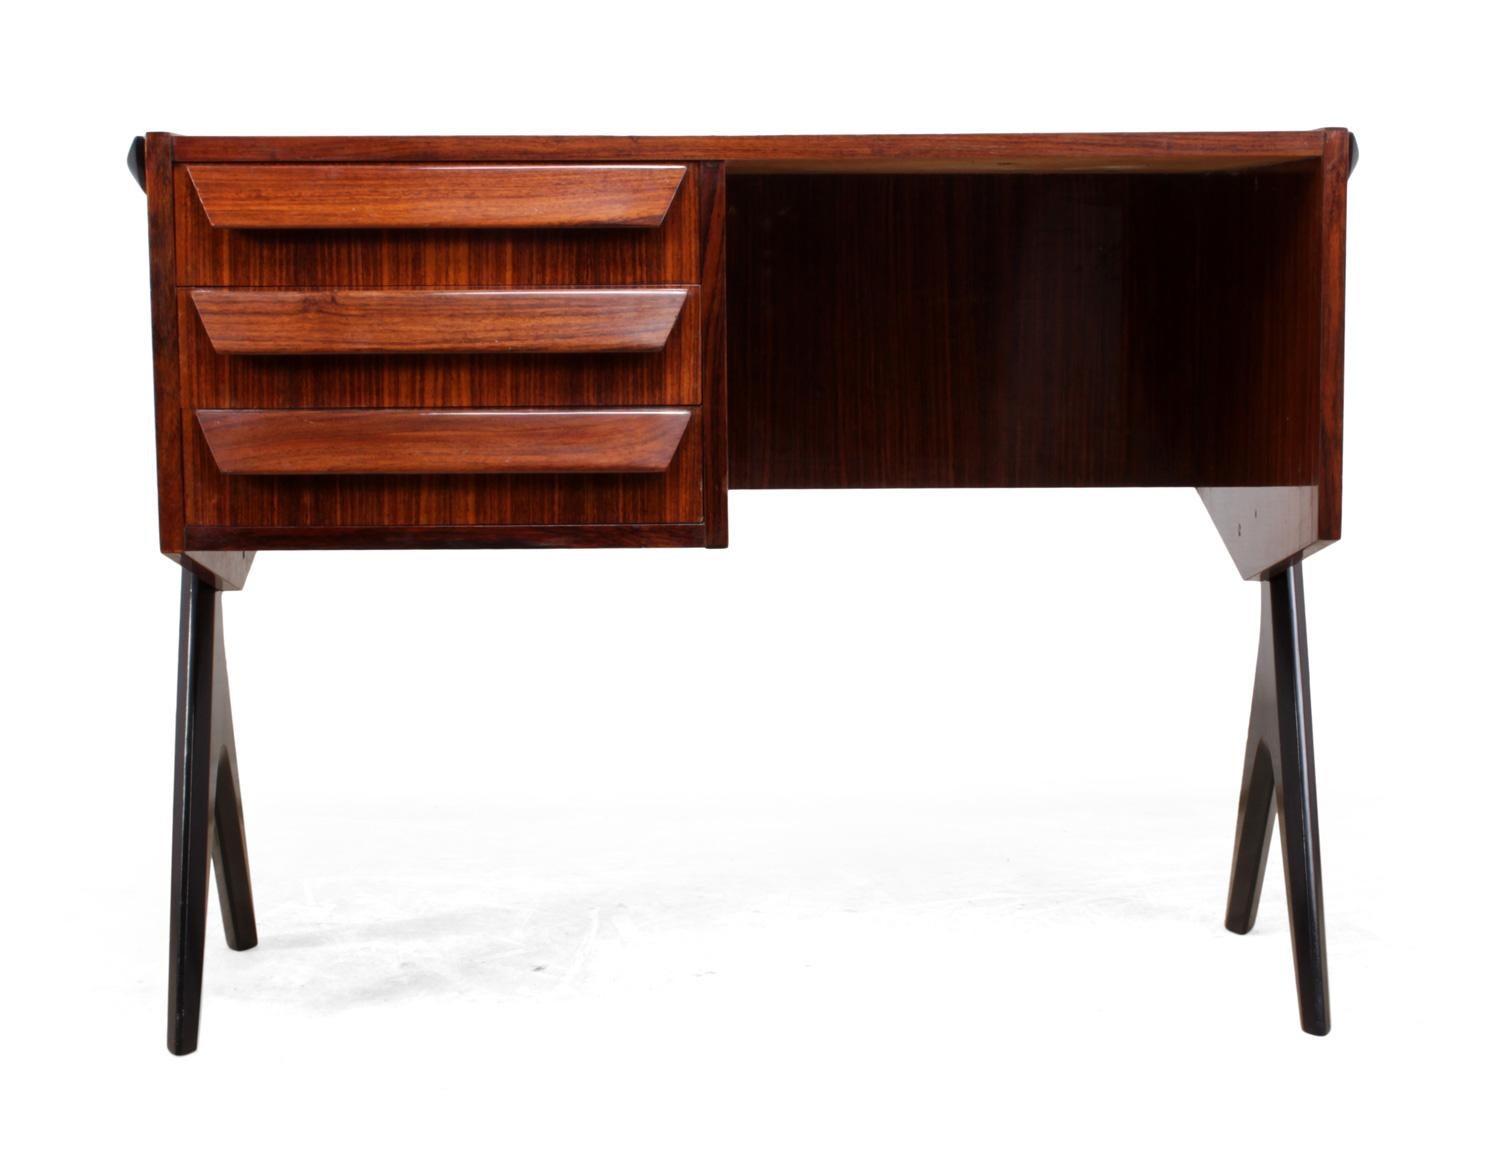 Midcentury desk in rosewood Italian, circa 1950
produced in Italy in the 1950s this desk has three drawers to the left hand side and Ico Parisi style legs the desk is in excellent condition throughout

Age: 1950

Style: Italian MCM

Material: